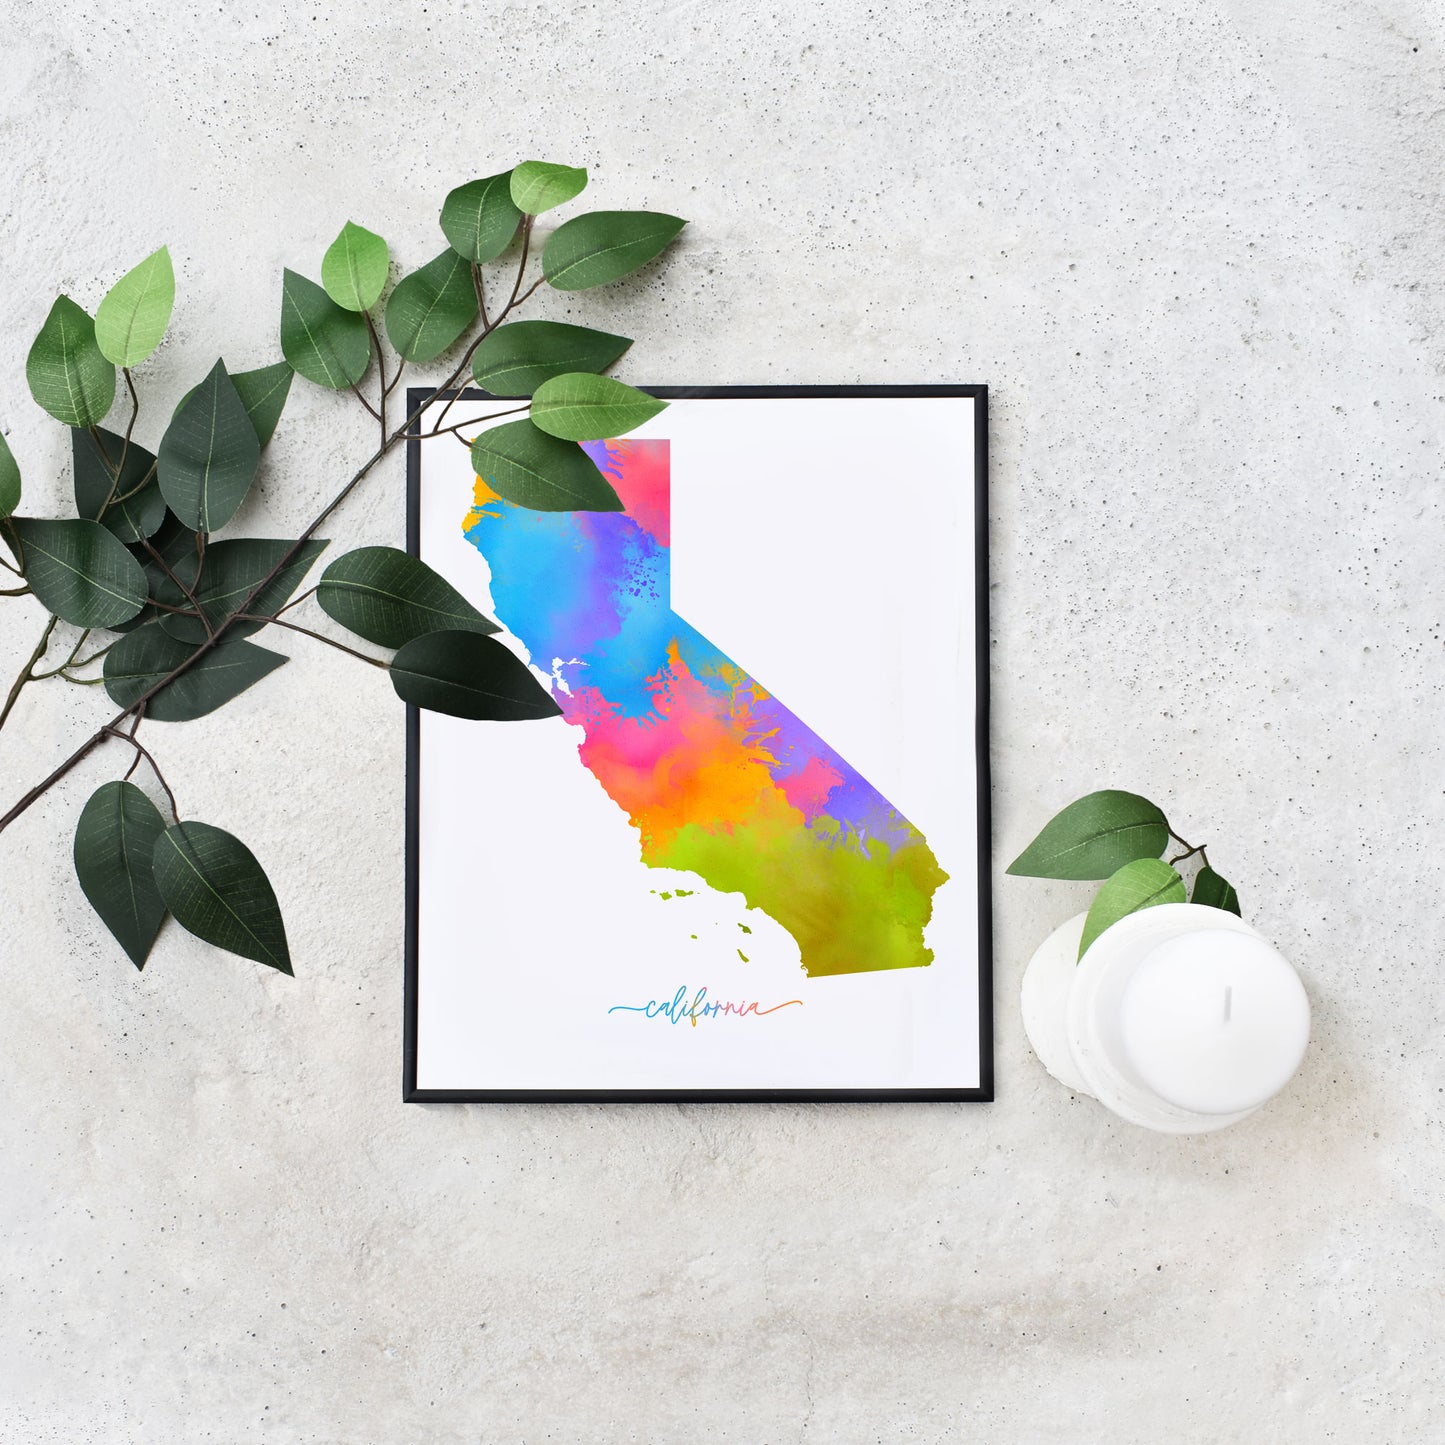 Easy Downloadable California State USA Map Print